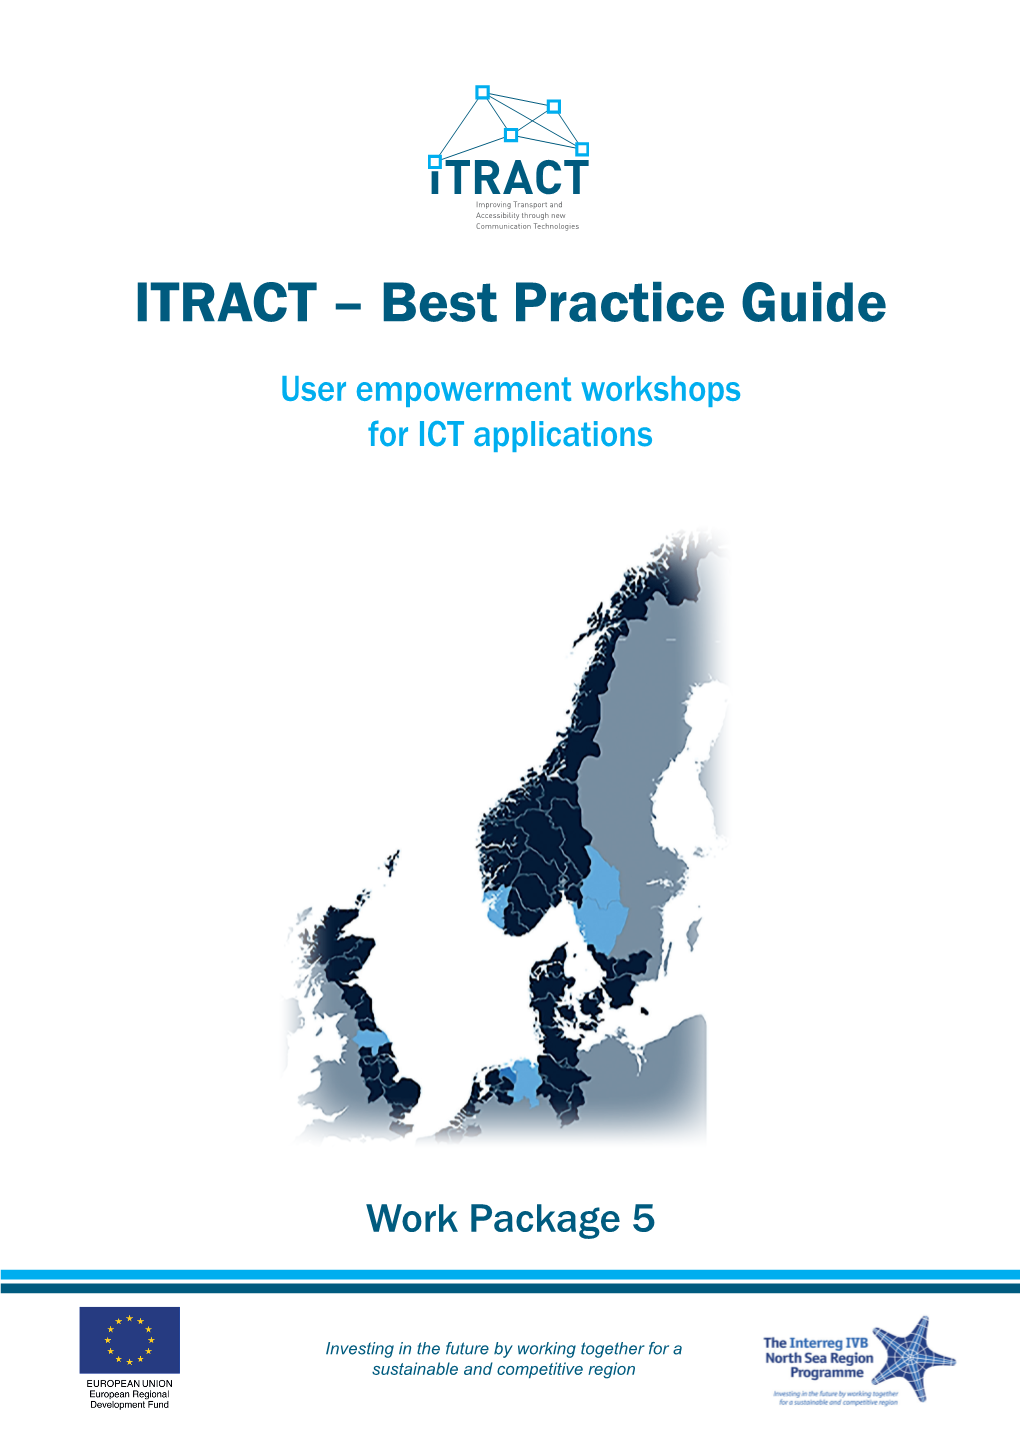 BPG User Empowerment Workshops for ICT Applications WP5 ITRACT